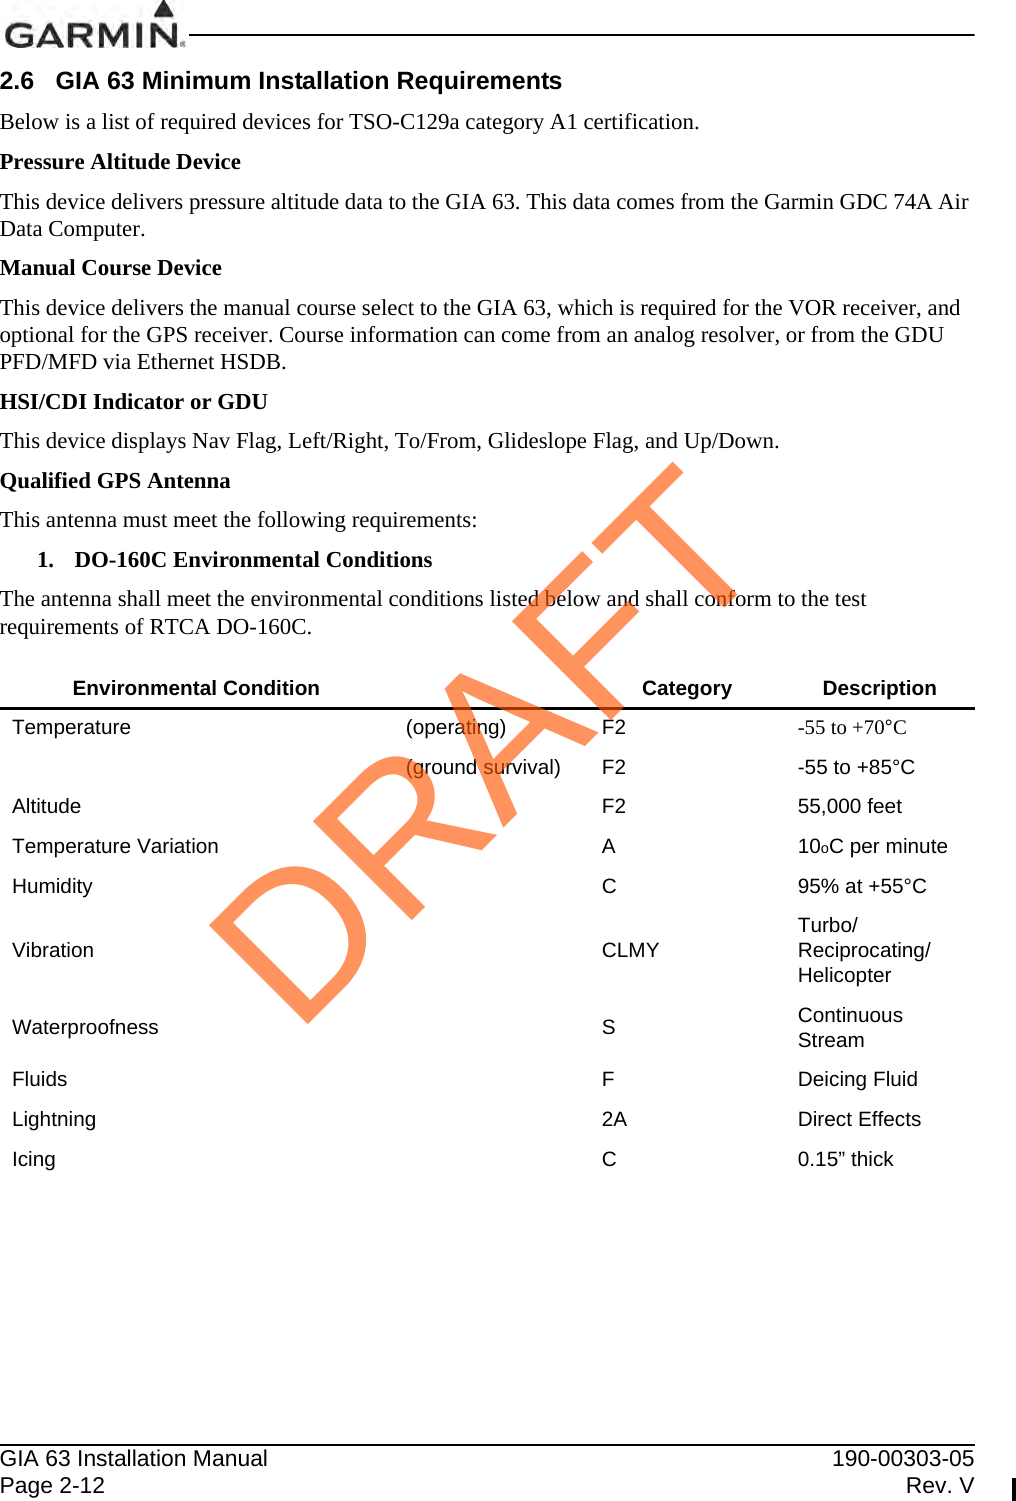 GIA 63 Installation Manual 190-00303-05Page 2-12 Rev. V2.6 GIA 63 Minimum Installation RequirementsBelow is a list of required devices for TSO-C129a category A1 certification.Pressure Altitude DeviceThis device delivers pressure altitude data to the GIA 63. This data comes from the Garmin GDC 74A Air Data Computer.Manual Course DeviceThis device delivers the manual course select to the GIA 63, which is required for the VOR receiver, and optional for the GPS receiver. Course information can come from an analog resolver, or from the GDU PFD/MFD via Ethernet HSDB.HSI/CDI Indicator or GDUThis device displays Nav Flag, Left/Right, To/From, Glideslope Flag, and Up/Down.Qualified GPS AntennaThis antenna must meet the following requirements:1. DO-160C Environmental ConditionsThe antenna shall meet the environmental conditions listed below and shall conform to the test requirements of RTCA DO-160C.Environmental Condition Category DescriptionTemperature (operating) F2 -55 to +70°C(ground survival) F2 -55 to +85°CAltitude F2 55,000 feetTemperature Variation A10oC per minuteHumidity C95% at +55°CVibration CLMY Turbo/Reciprocating/HelicopterWaterproofness SContinuous StreamFluids FDeicing FluidLightning 2A Direct EffectsIcing C0.15” thickDRAFT